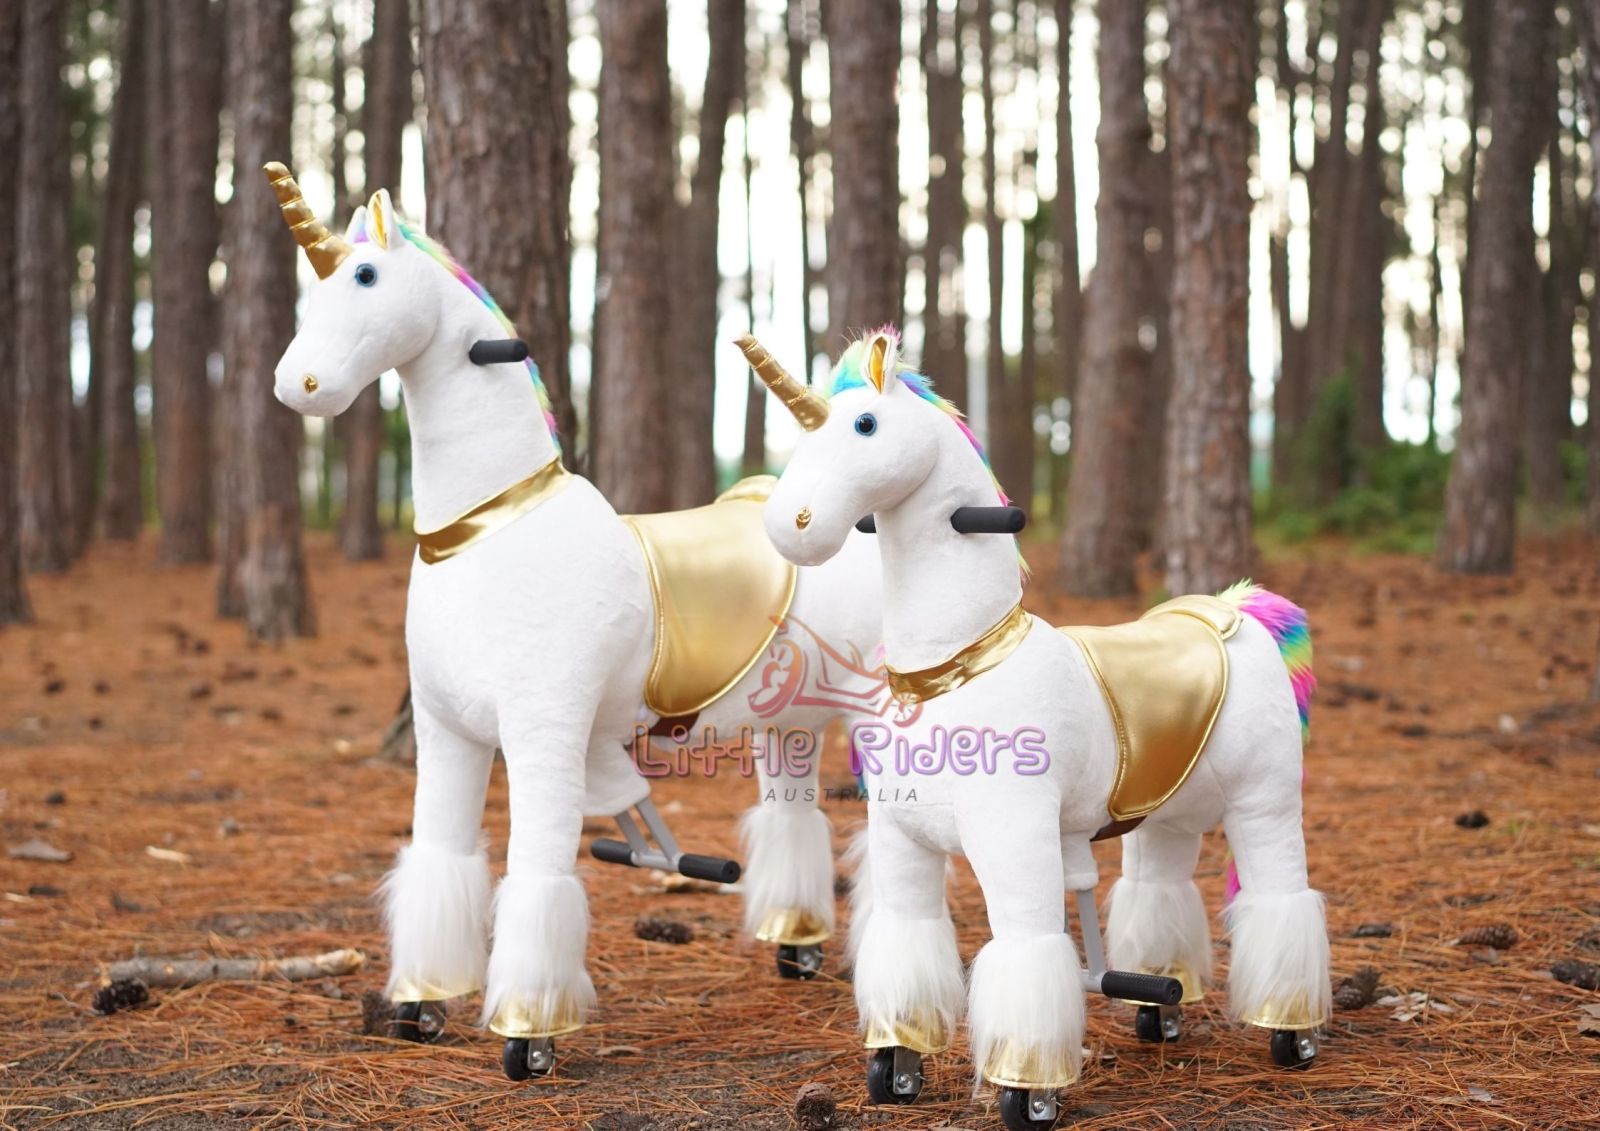 Ride on toys - Rainbow and golden ride on unicorns in medium and small